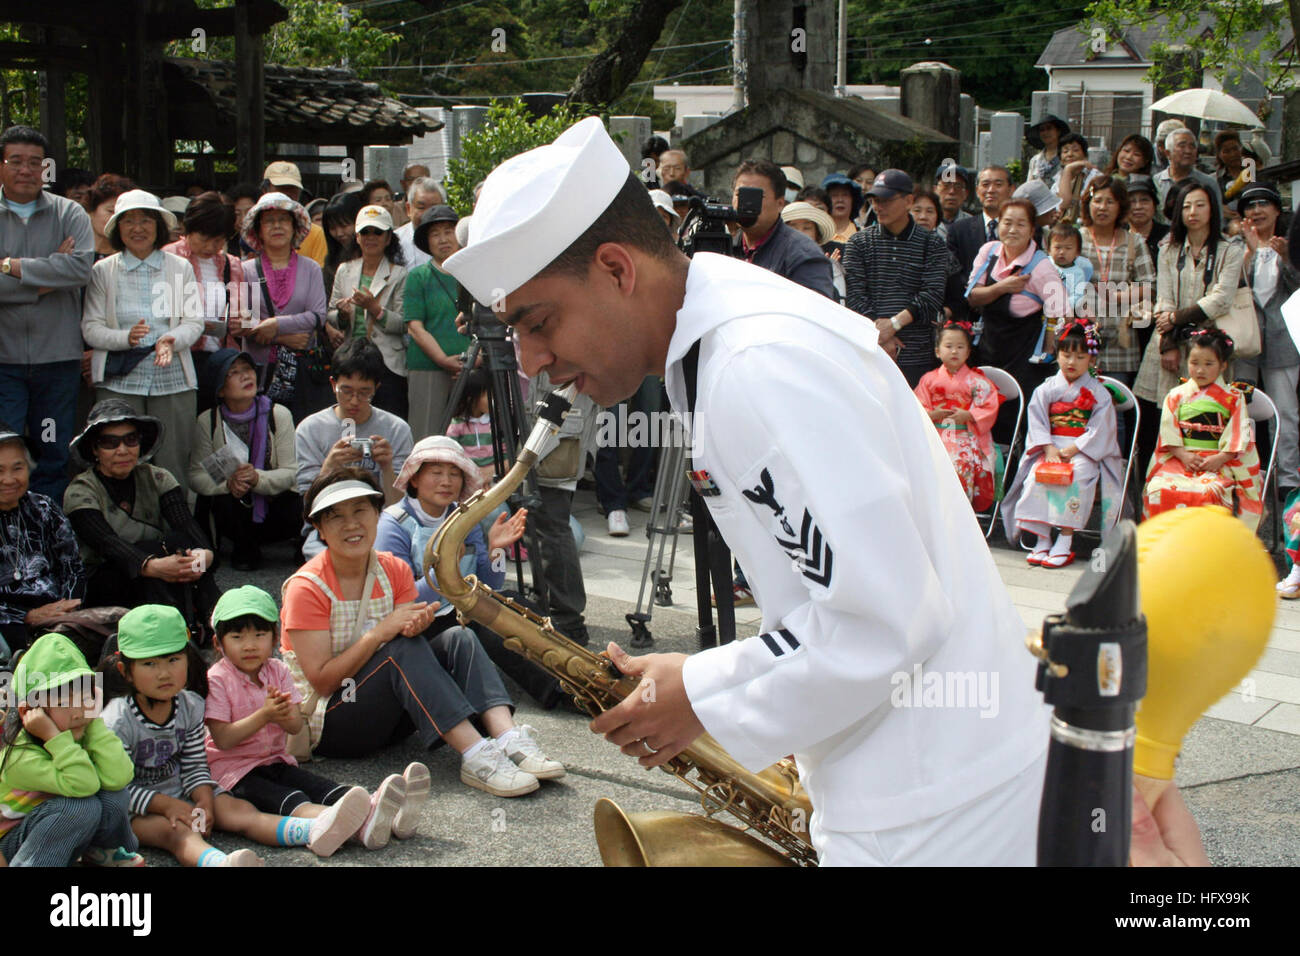 090515-N-9719D-622  SHIMODA, Japan (May 15, 2009) Musician 1st Class Christopher Sams, assigned to the U.S. 7th Fleet Brass Band, performs during the 70th Shimoda Black Ship festival. The band and the guided-missile destroyer USS McCampbell (DDG 8) visited Shimoda to support the festival, which commemorated the 1854 landing of Commodore Matthew Perry and his crew at Shimoda and the subsequent opening of trade between Japan and the West. (U.S. Navy photo by Musician 2nd Class Dirk Denton/Released) US Navy 090515-N-9719D-622 Musician 1st Class Christopher Sams performs during the 70th Shimoda Bl Stock Photo